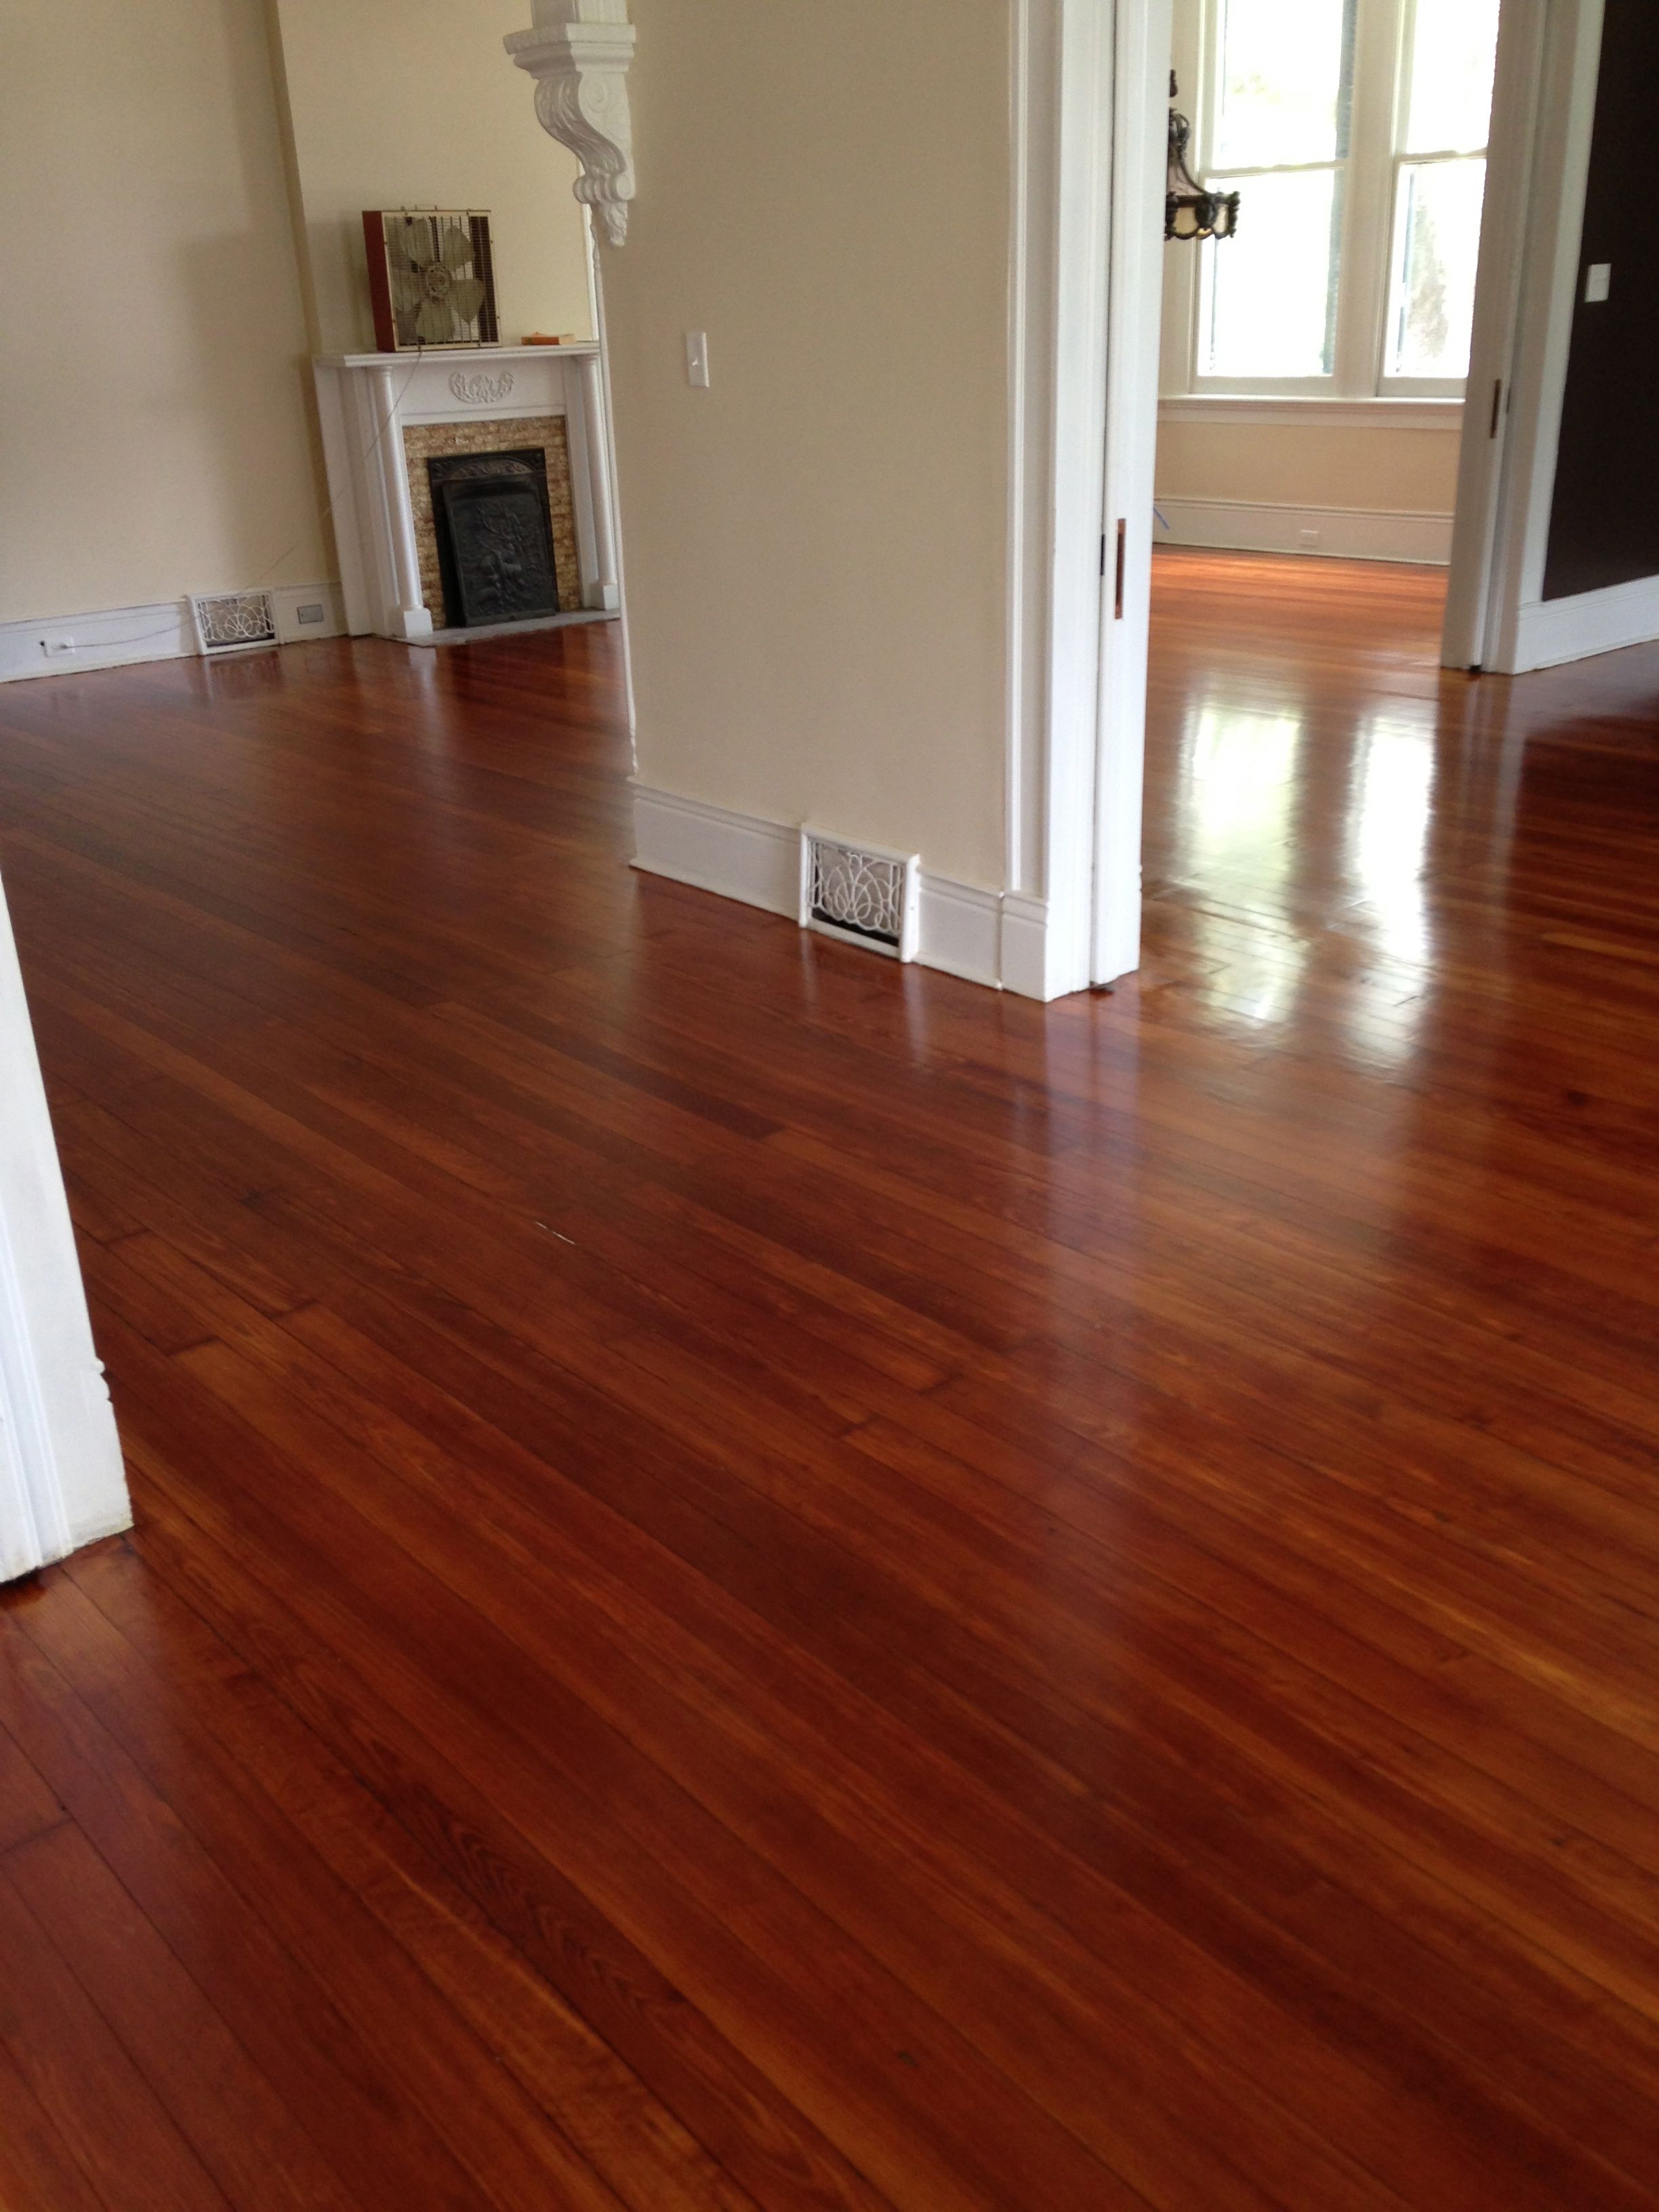 Shiny polyurethaned hardwood floors in living room with a fireplace